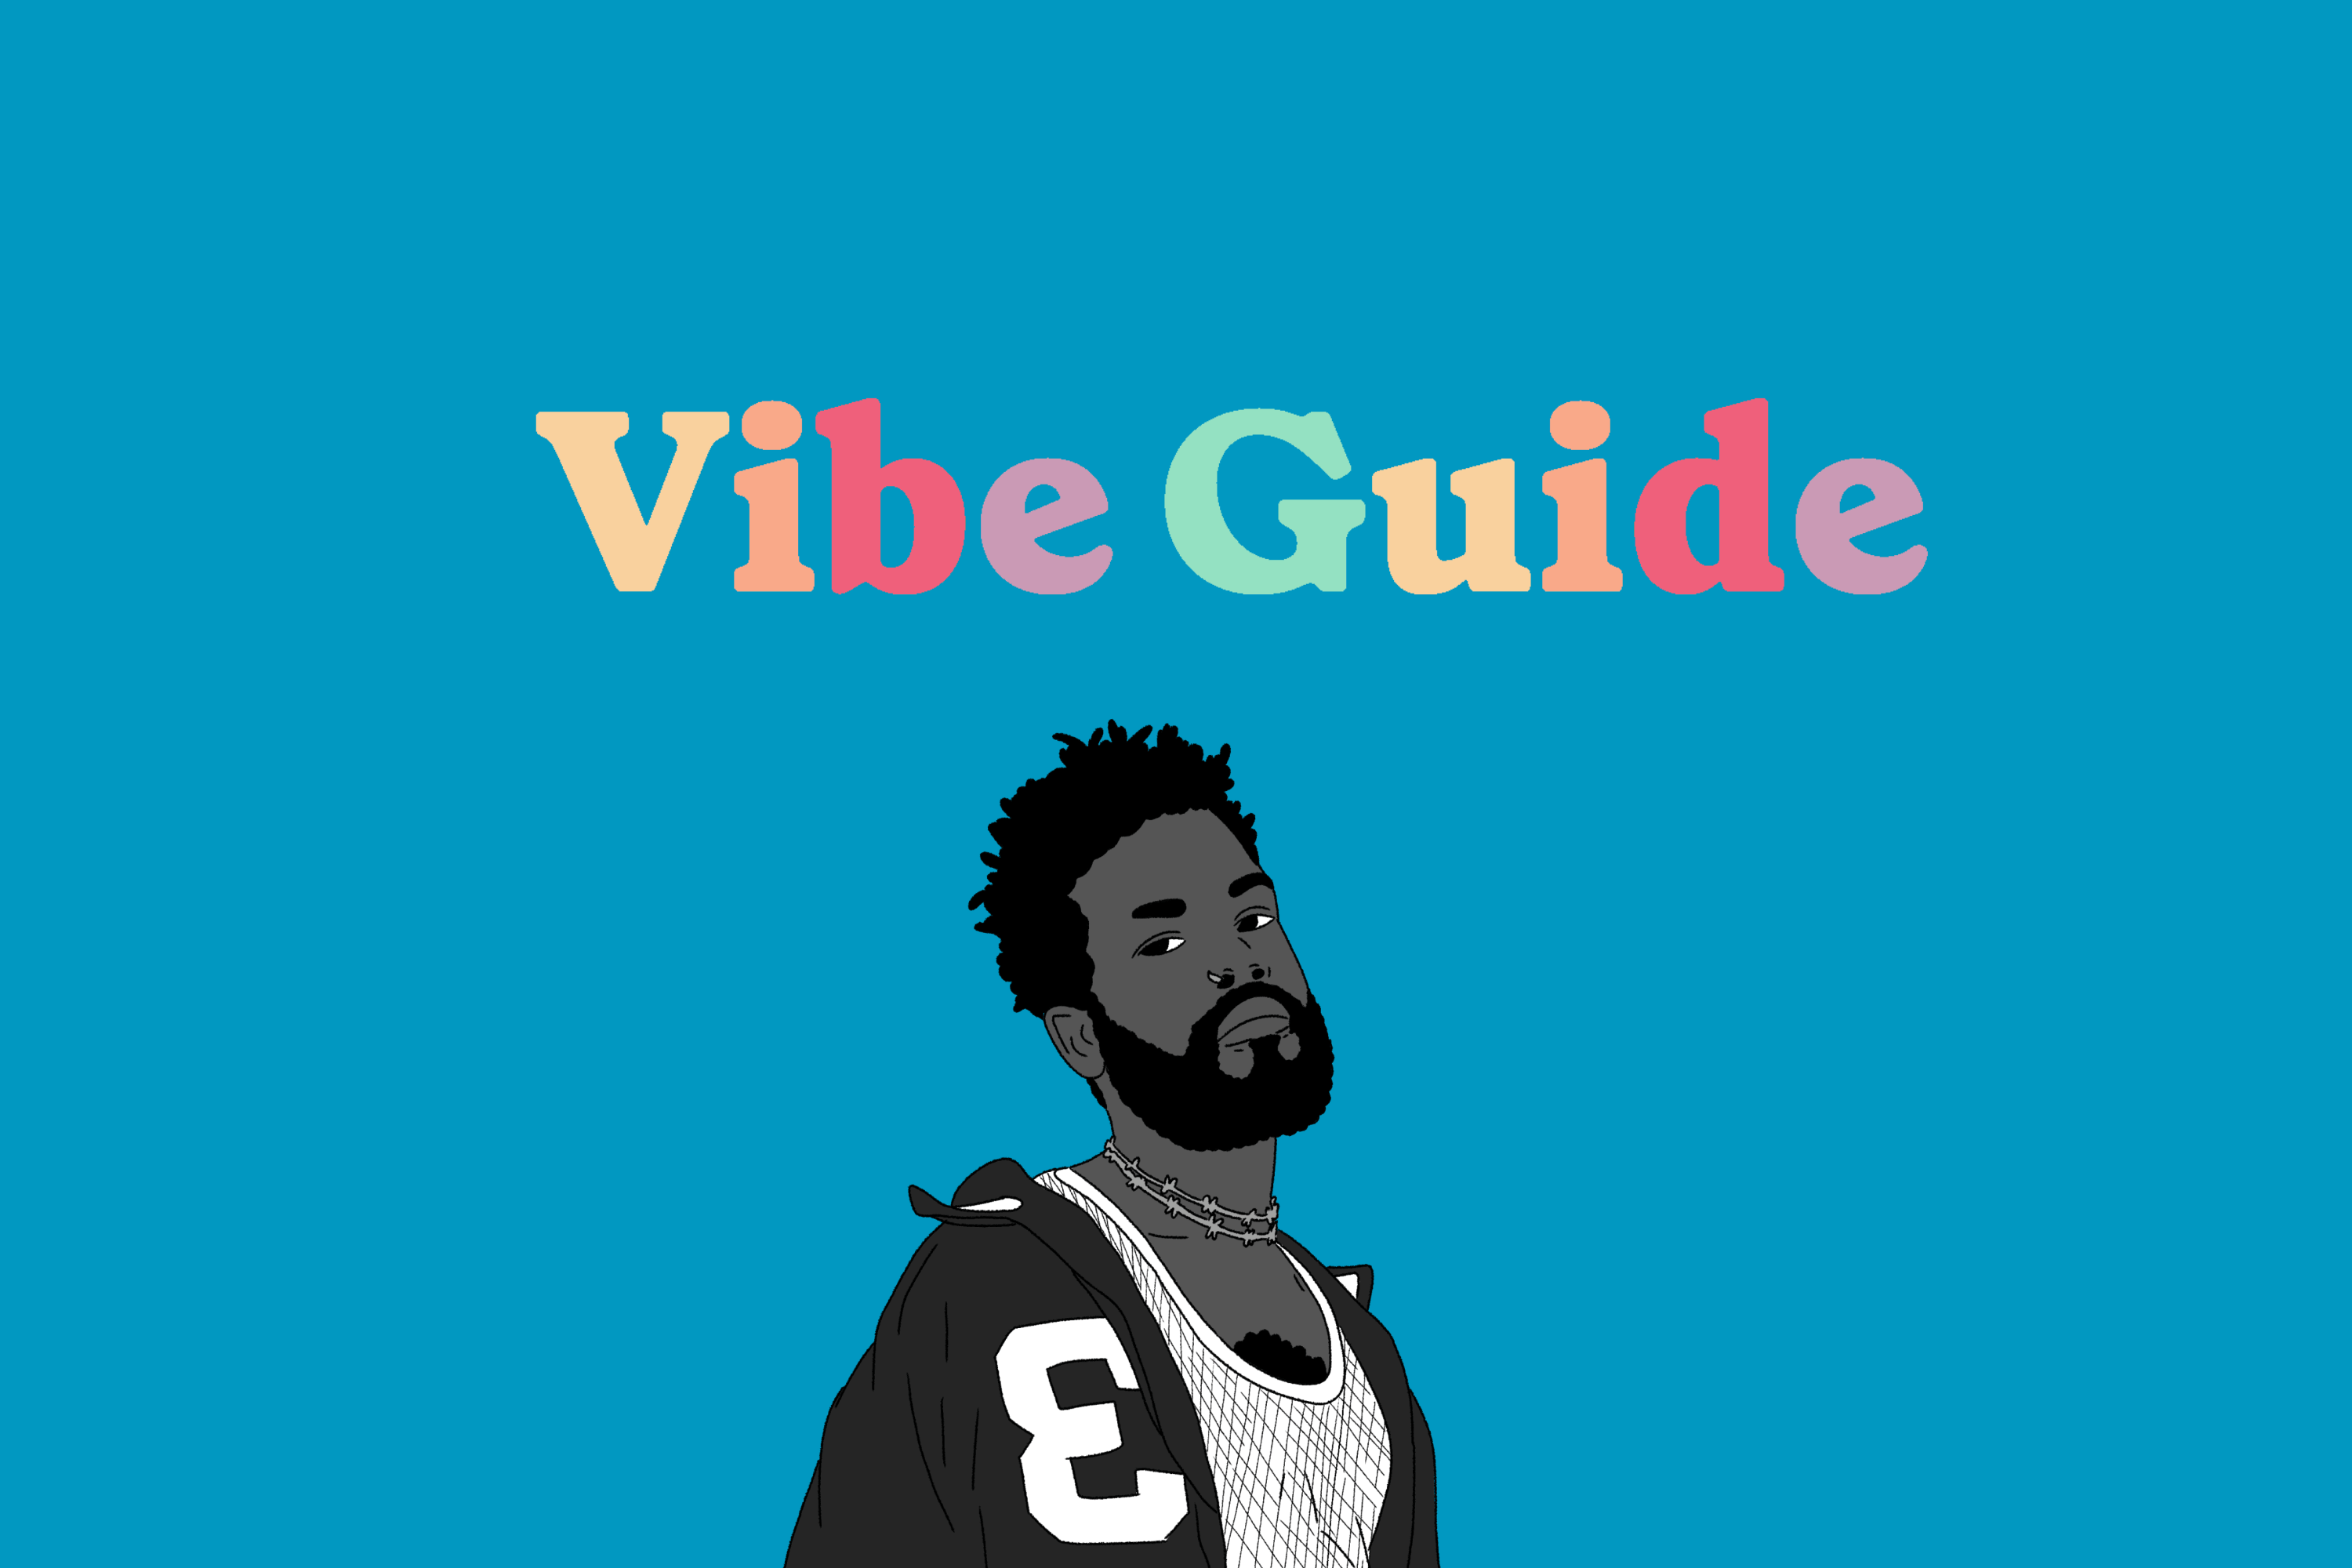 An illustration of the artist Duckwrth with the words "Vibe Guide featuring Duckwrth"